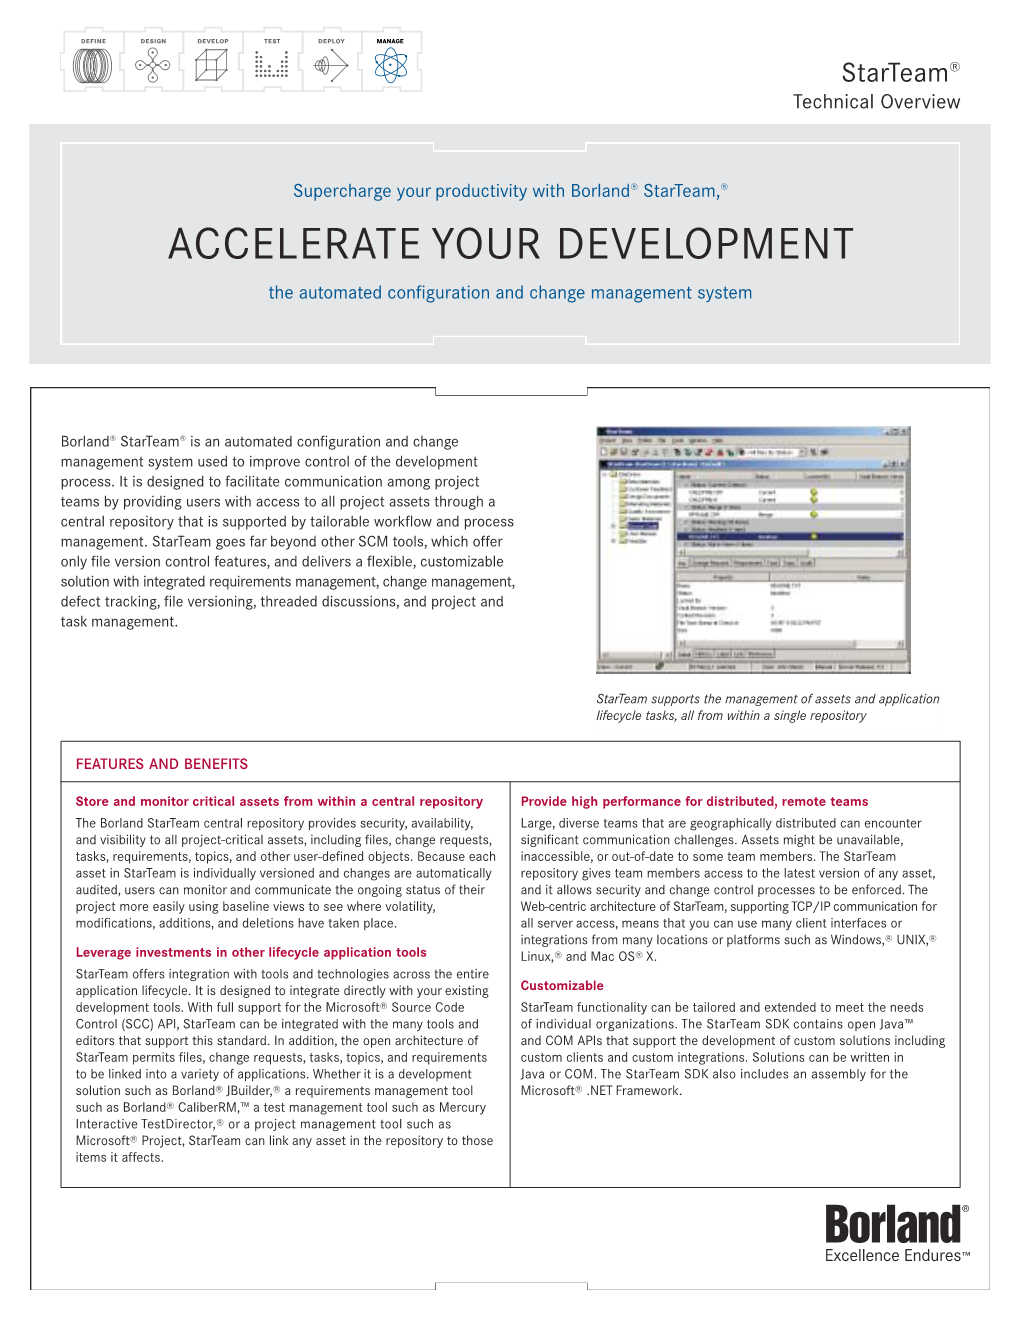 ACCELERATE YOUR DEVELOPMENT the Automated Configuration and Change Management System